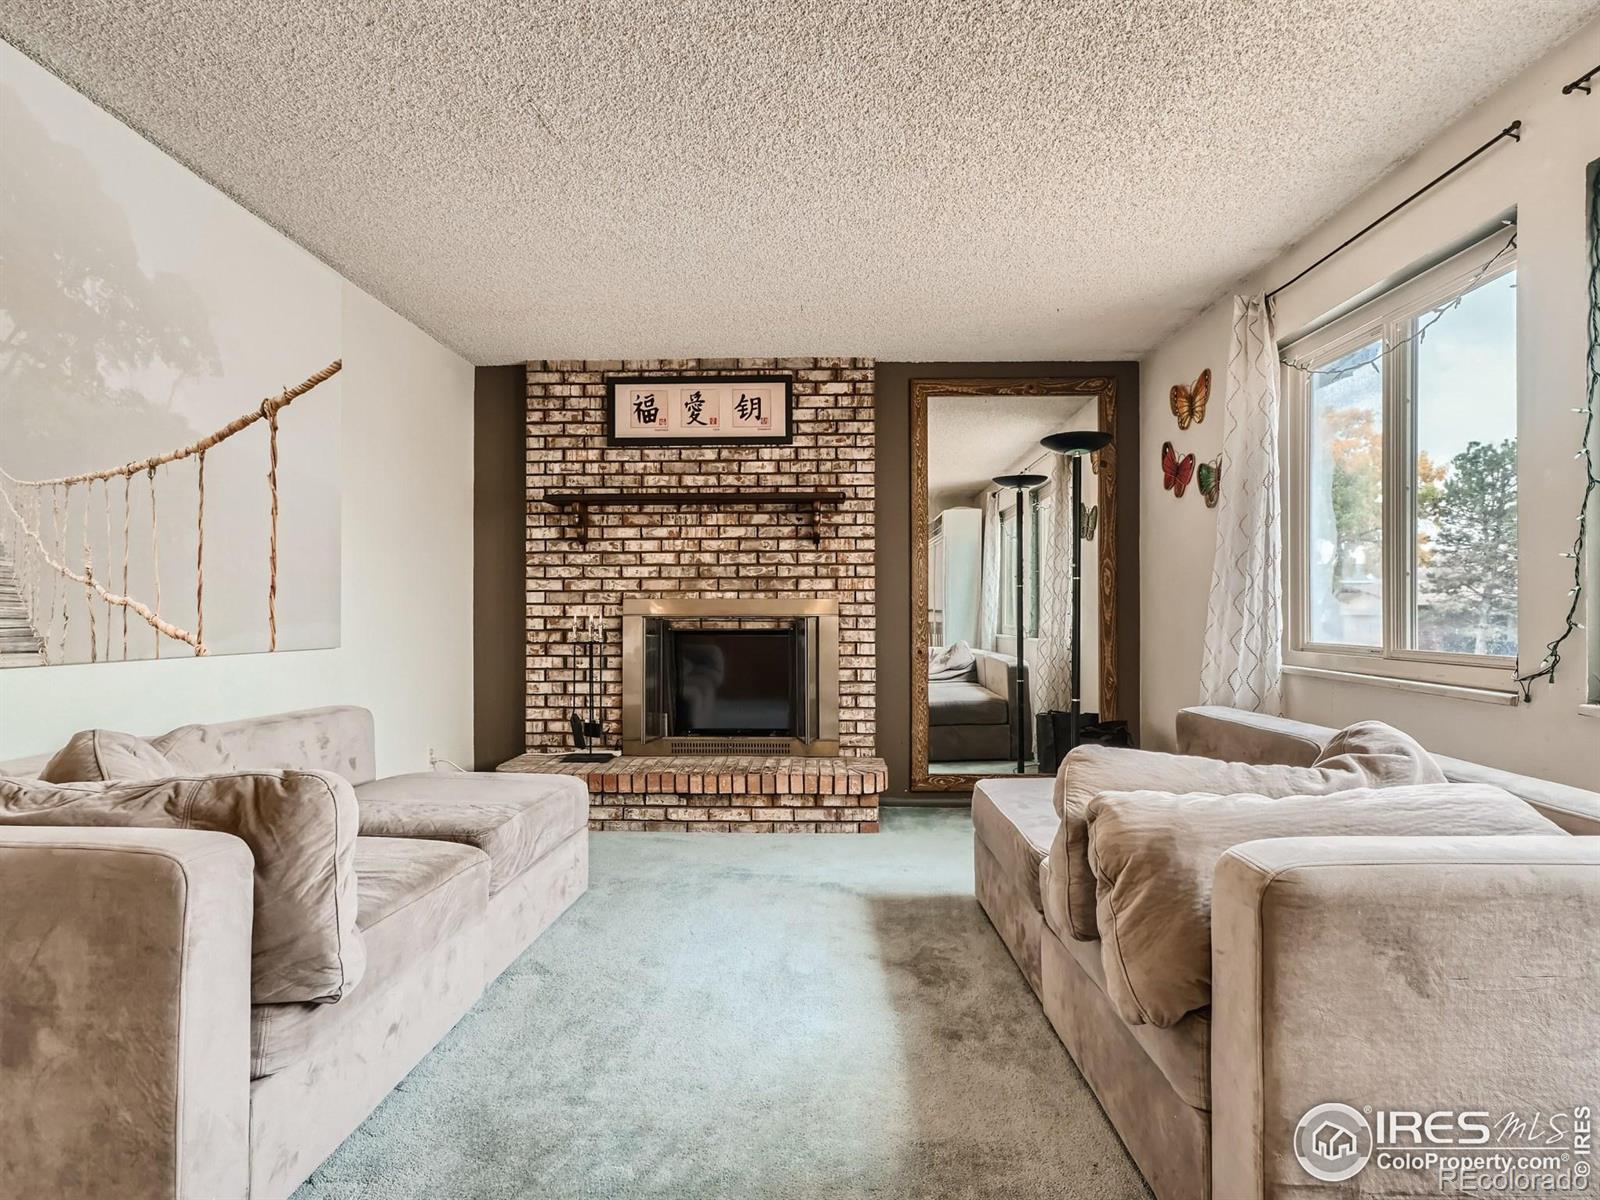 Report Image for 5020 W 71st Place,Westminster, Colorado